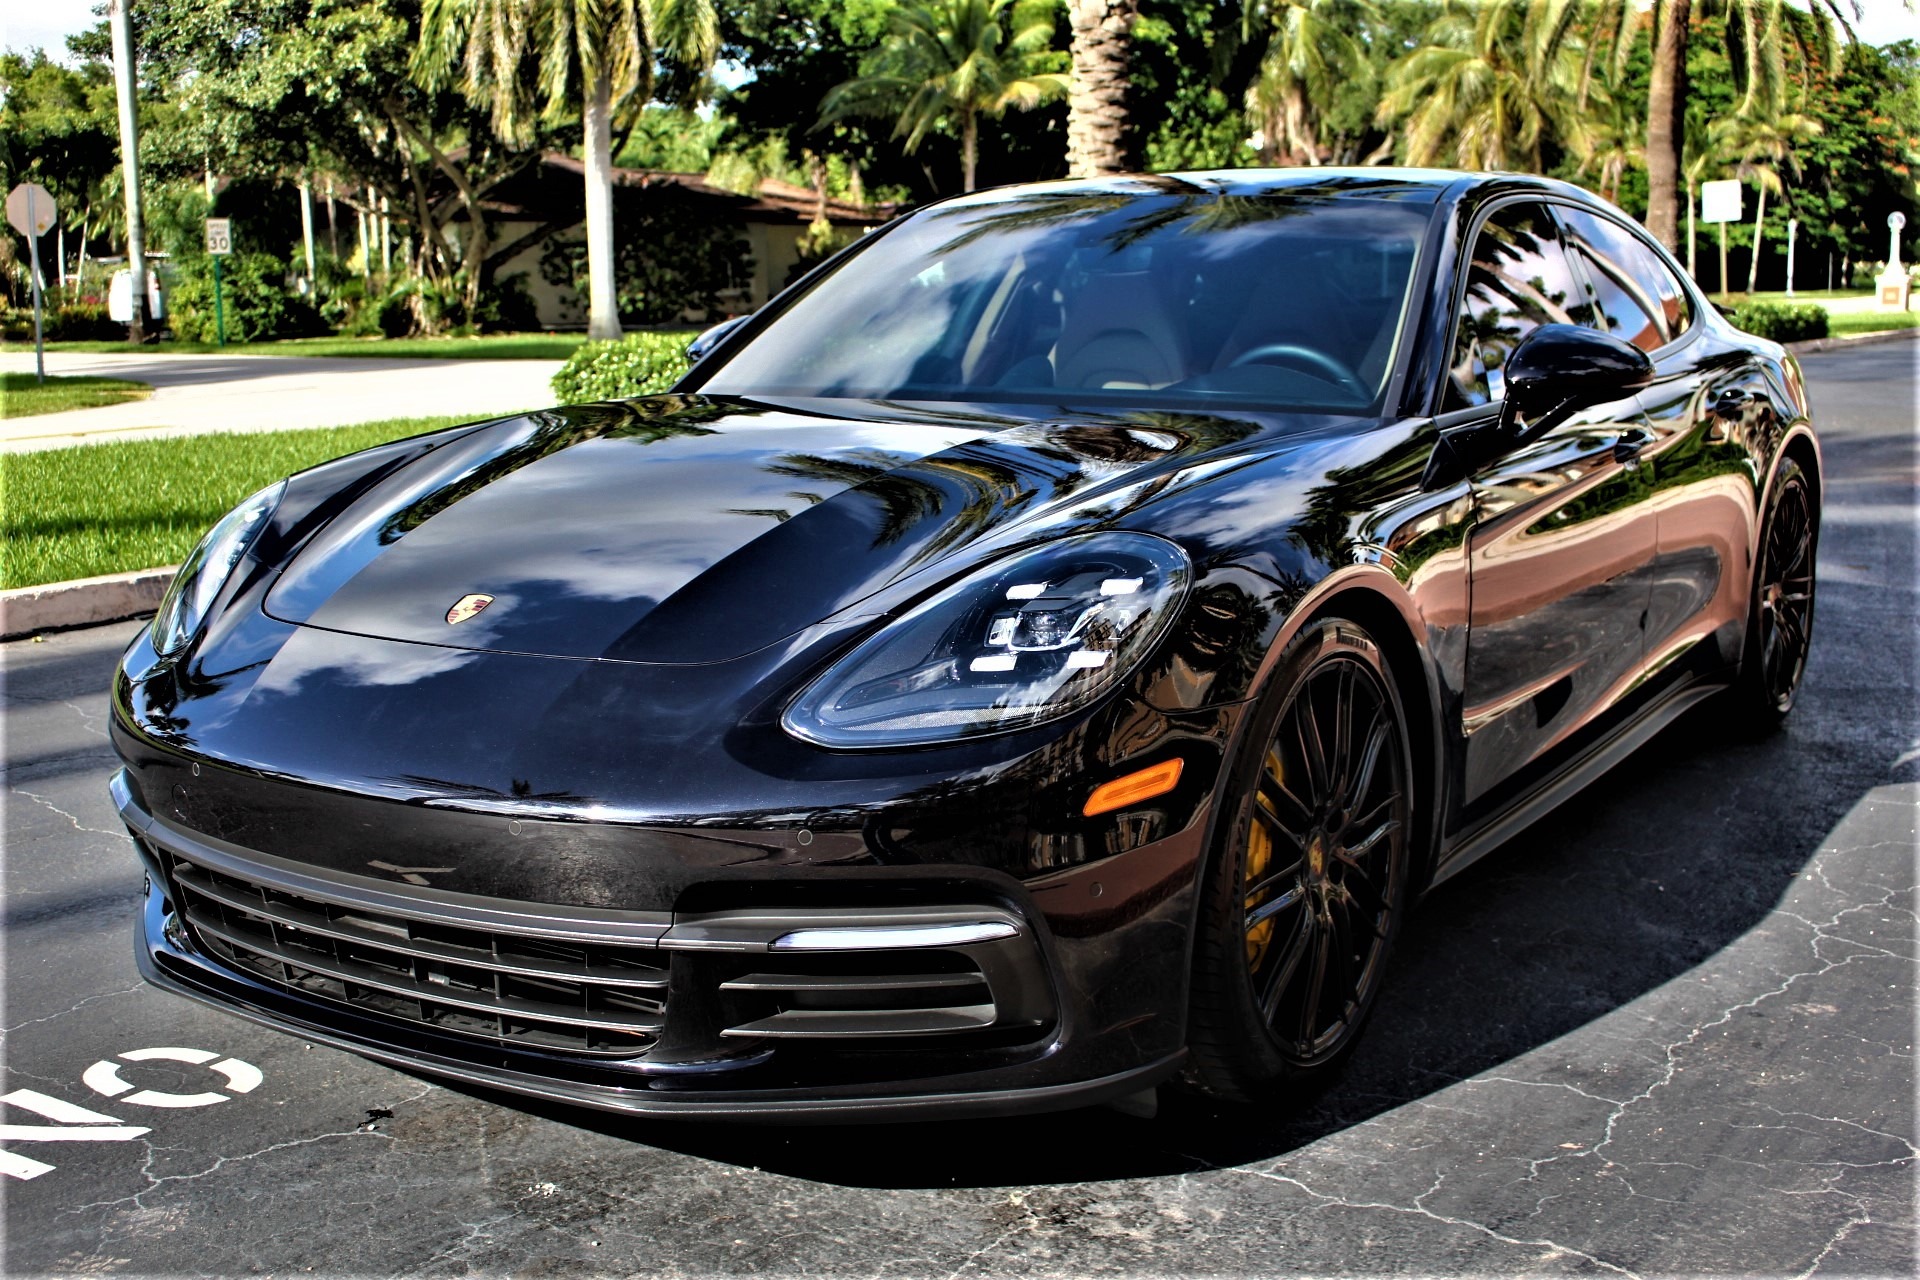 Used 2017 Porsche Panamera for sale Sold at The Gables Sports Cars in Miami FL 33146 4